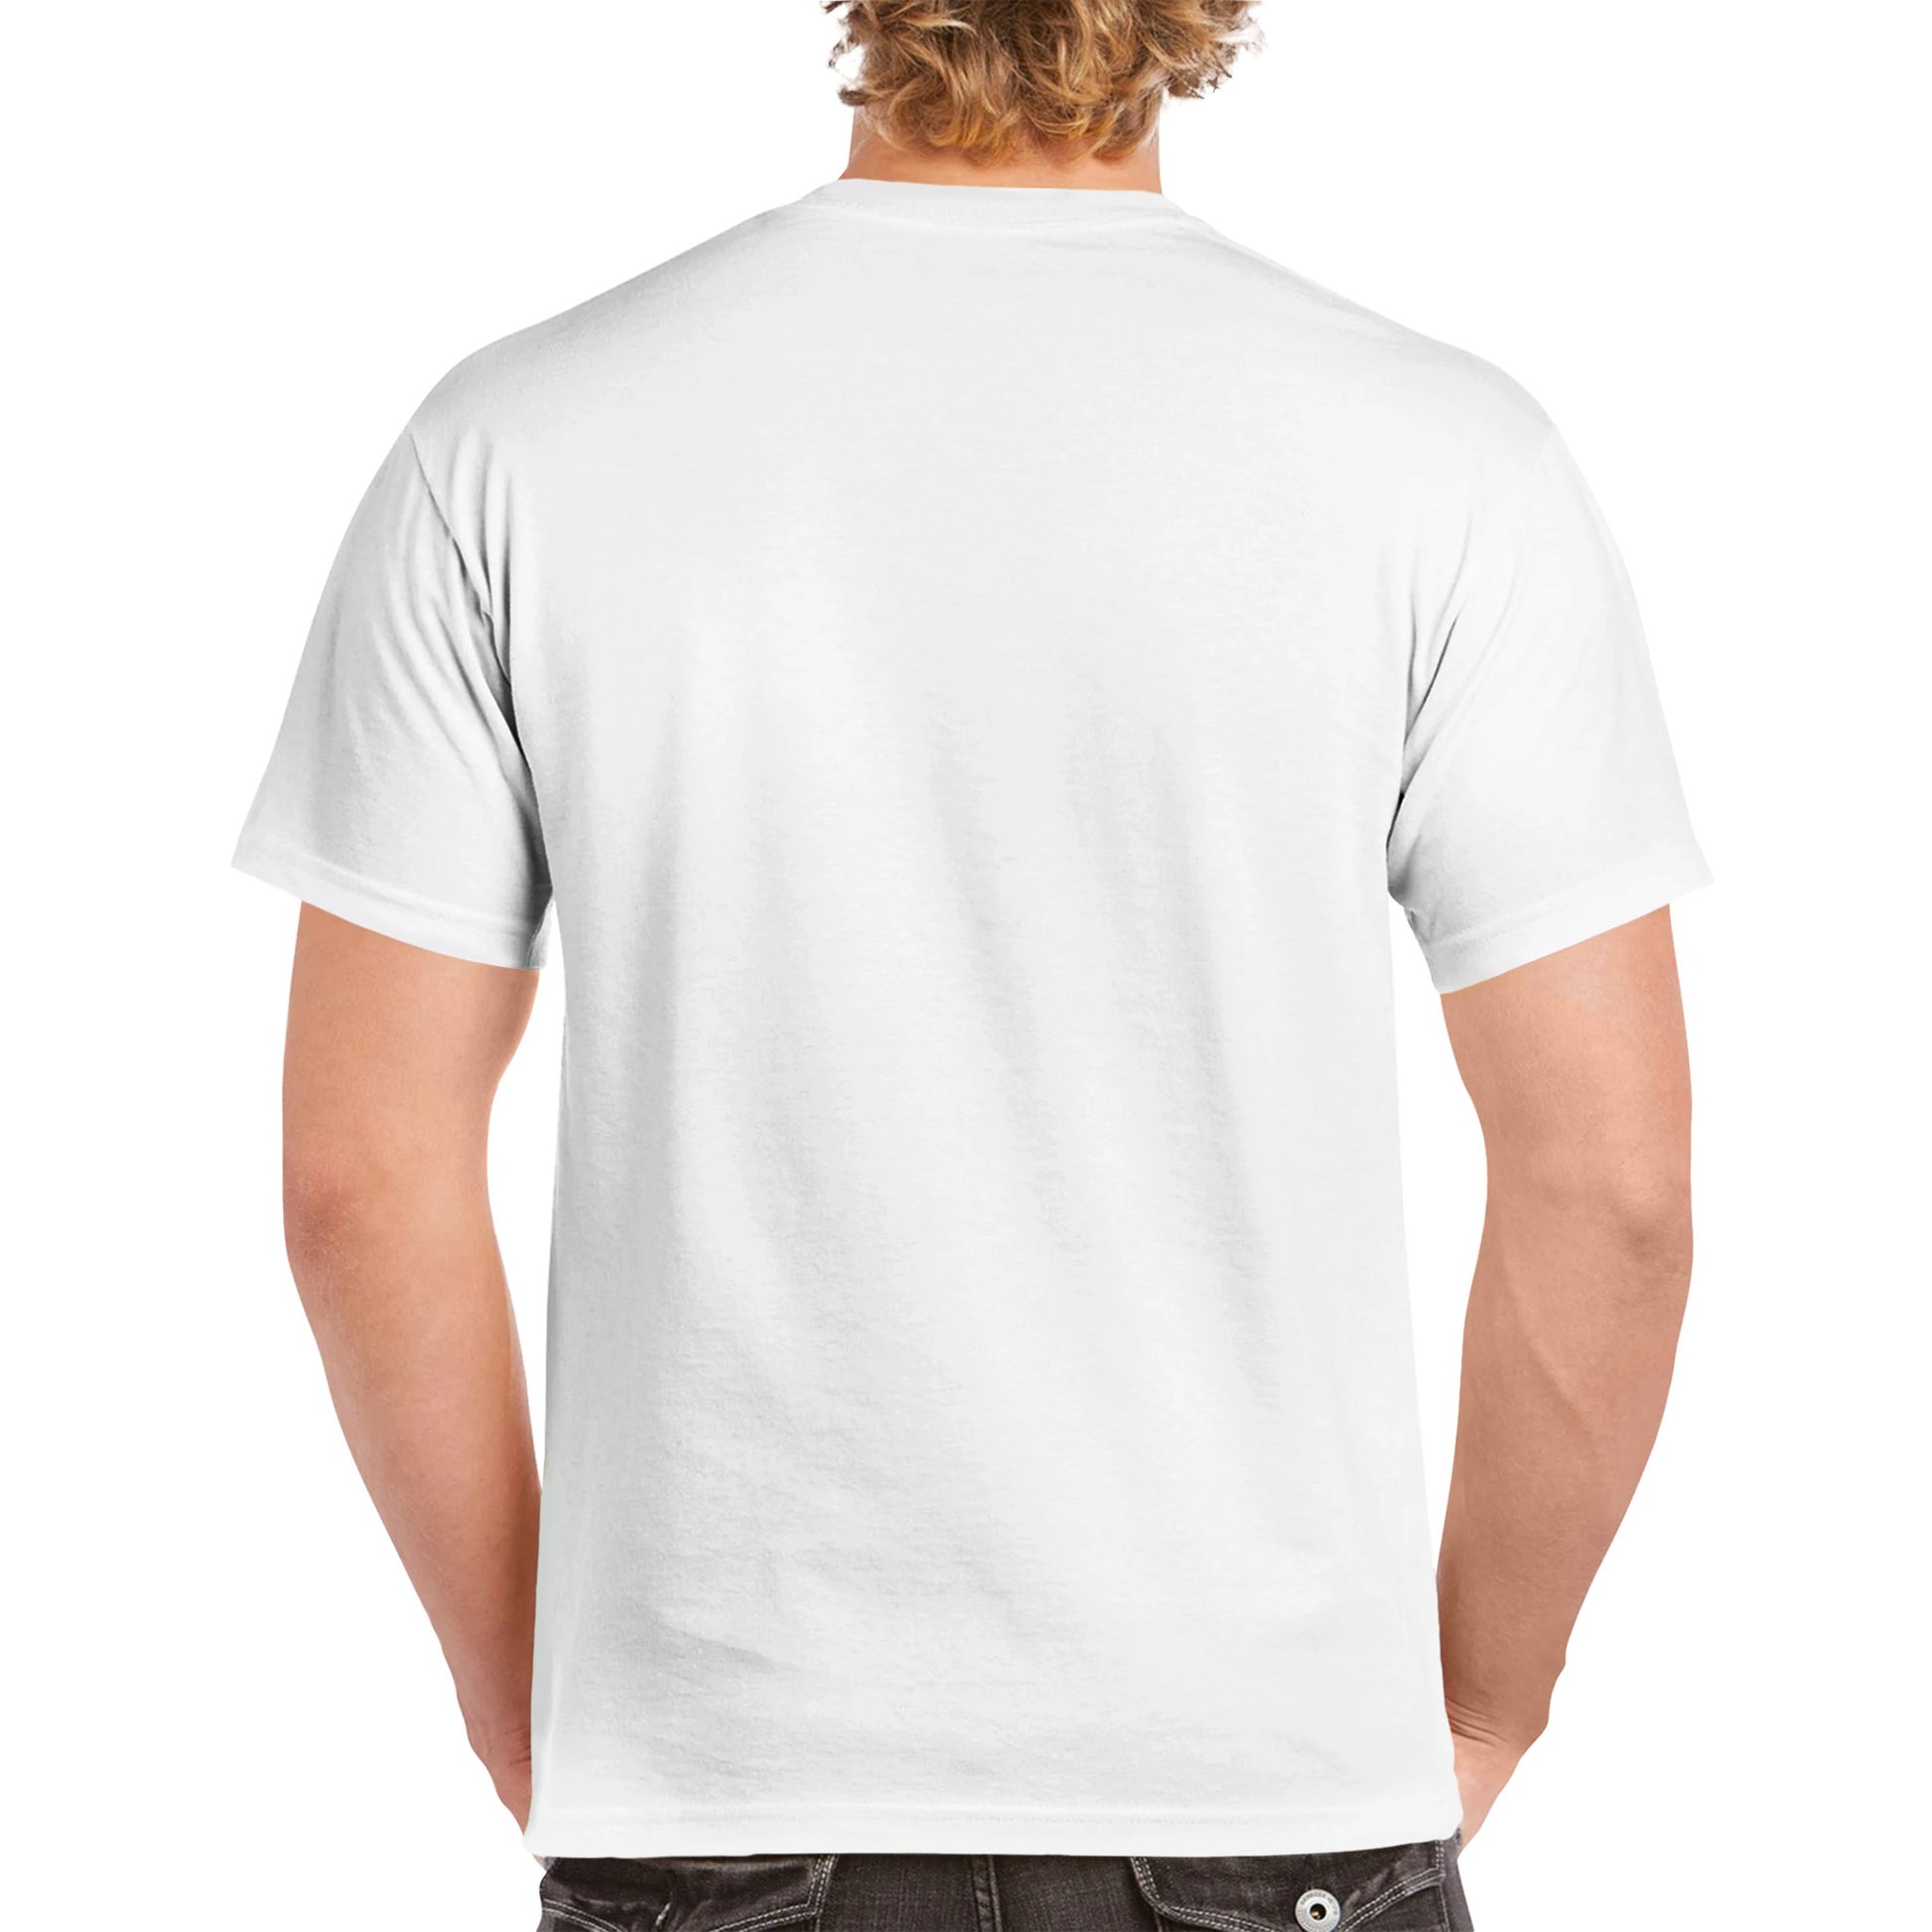 Blonde hair Male standing wearing white heavyweight Unisex Crewneck t-shirt with original artwork and motto Don’t Judge Me Till You’ve Drank from my margarita on front of t-shirt view of his back.